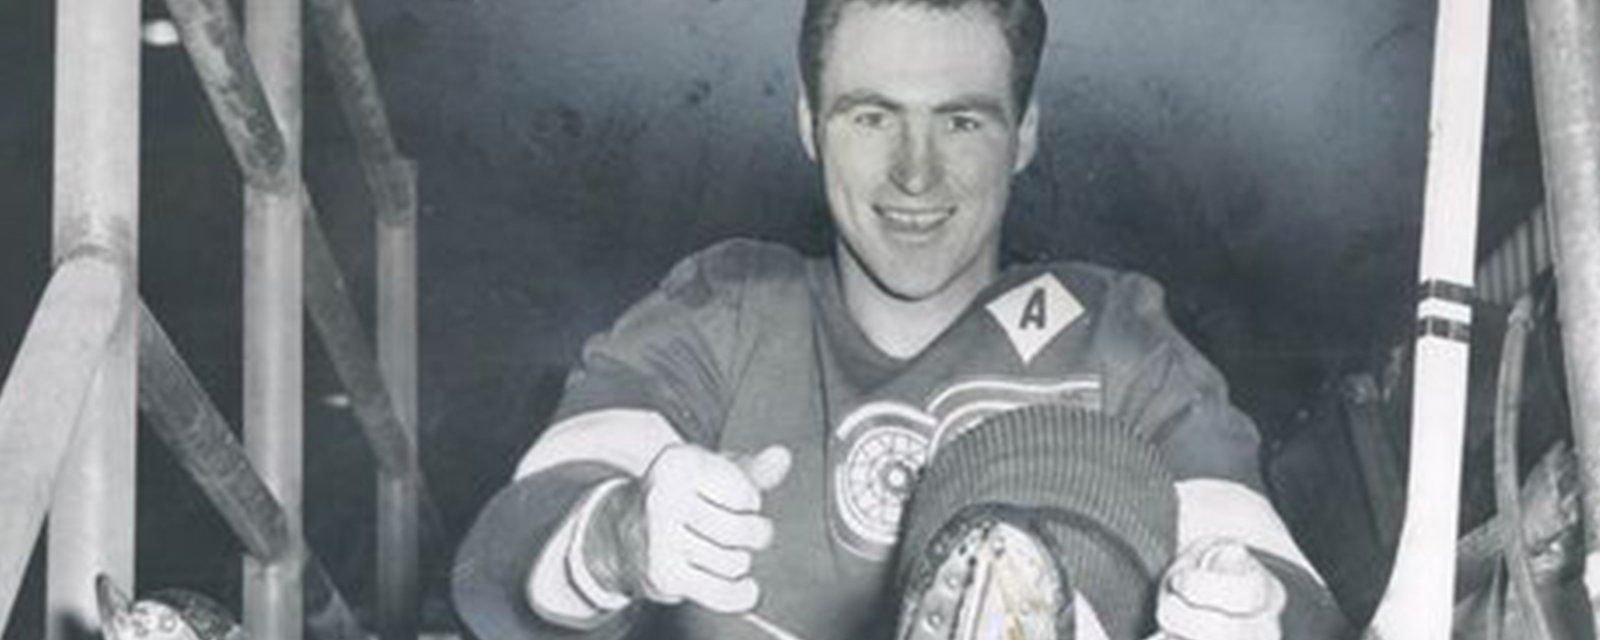 Breaking: Hall of Famer Red Kelly passes away at age 91